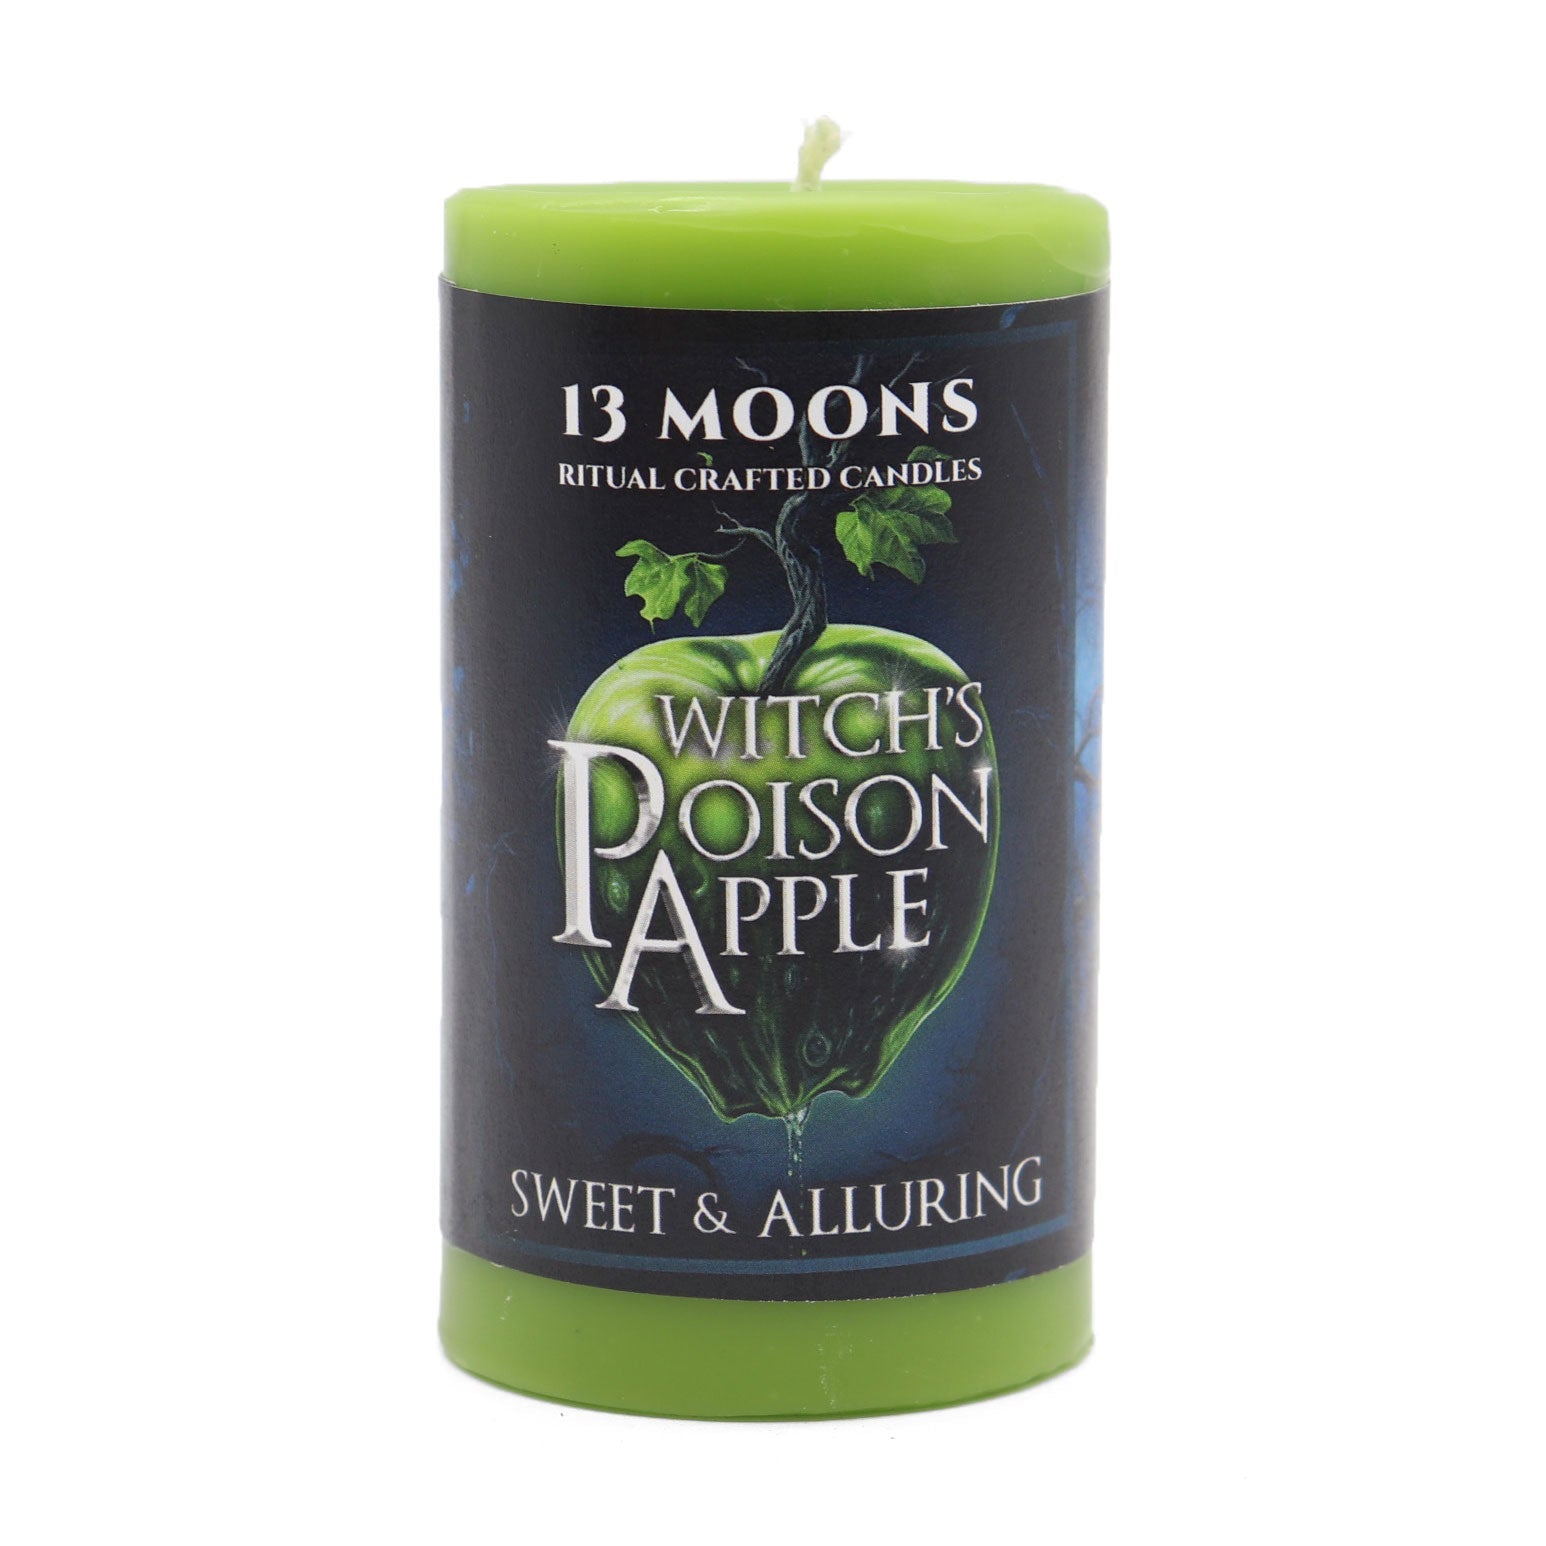 Witch's Poison Apple Ritual Candle Small Pillar - 13 Moons